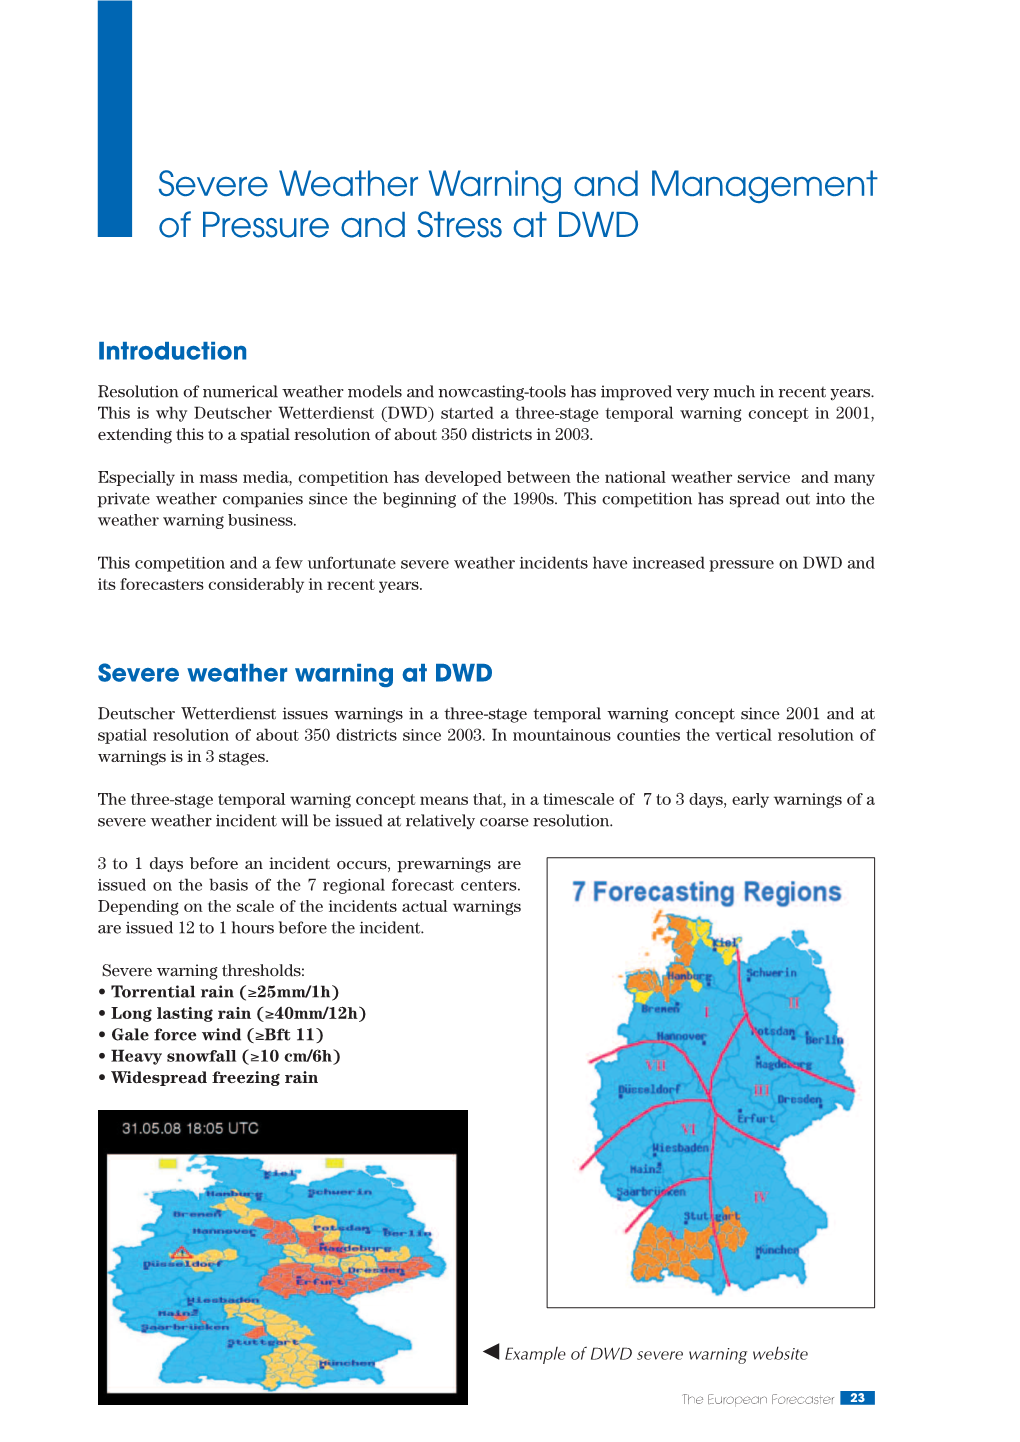 Severe Weather Warning and Management of Pressure and Stress at DWD